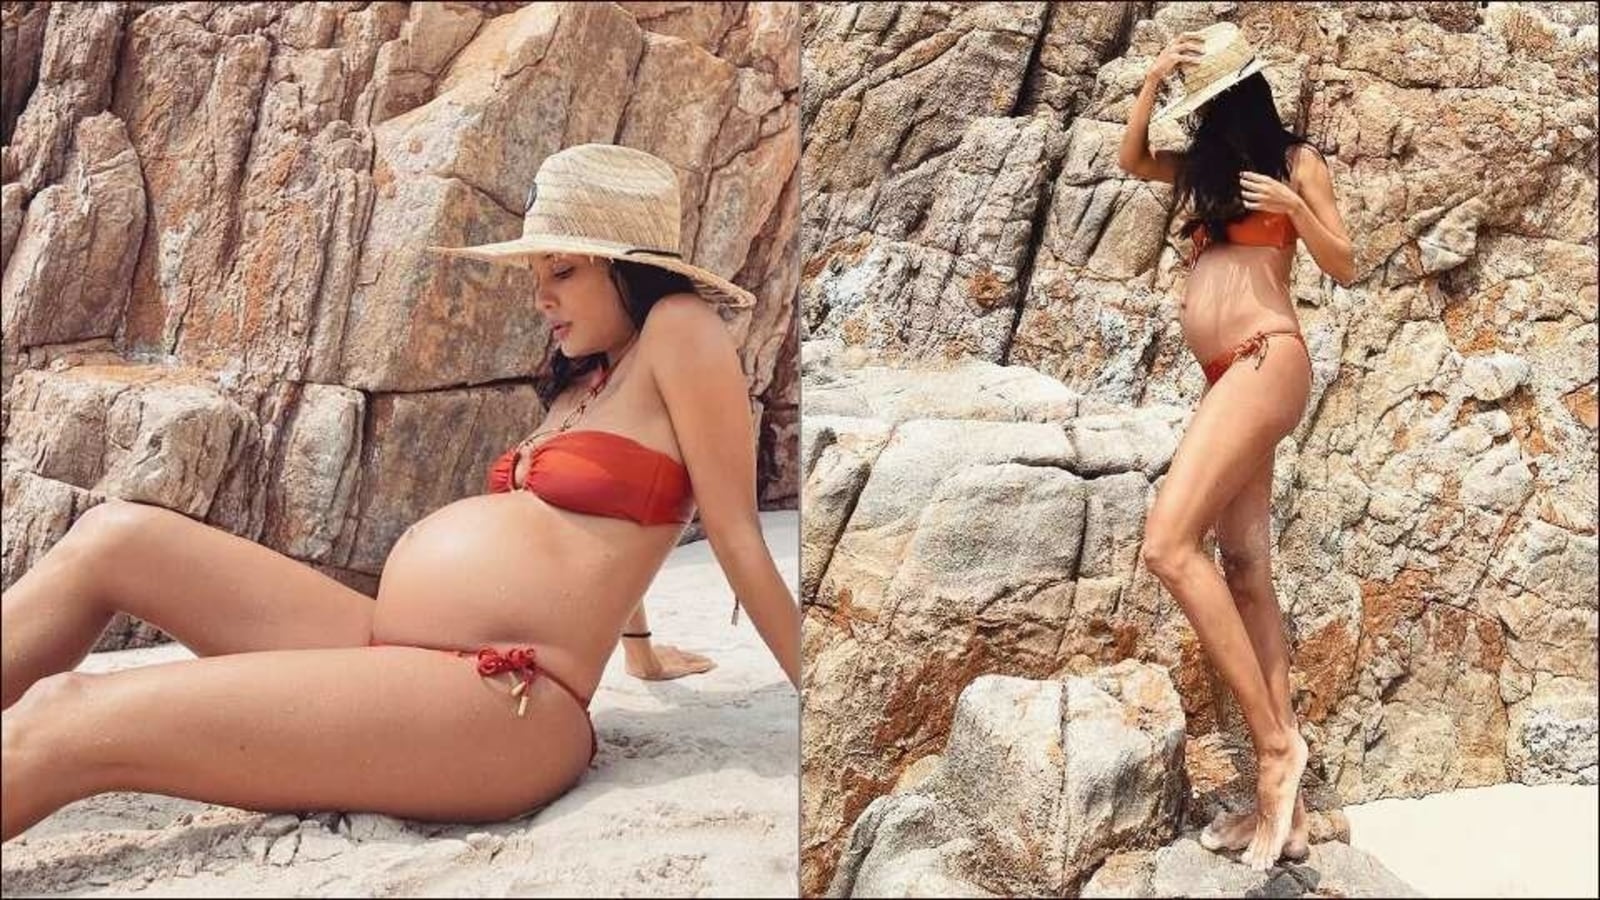 Caught Looking At Nude Beach - Third time pregnant Lisa Haydon sets Internet ablaze with her 'Beach bod  2021' | Fashion Trends - Hindustan Times